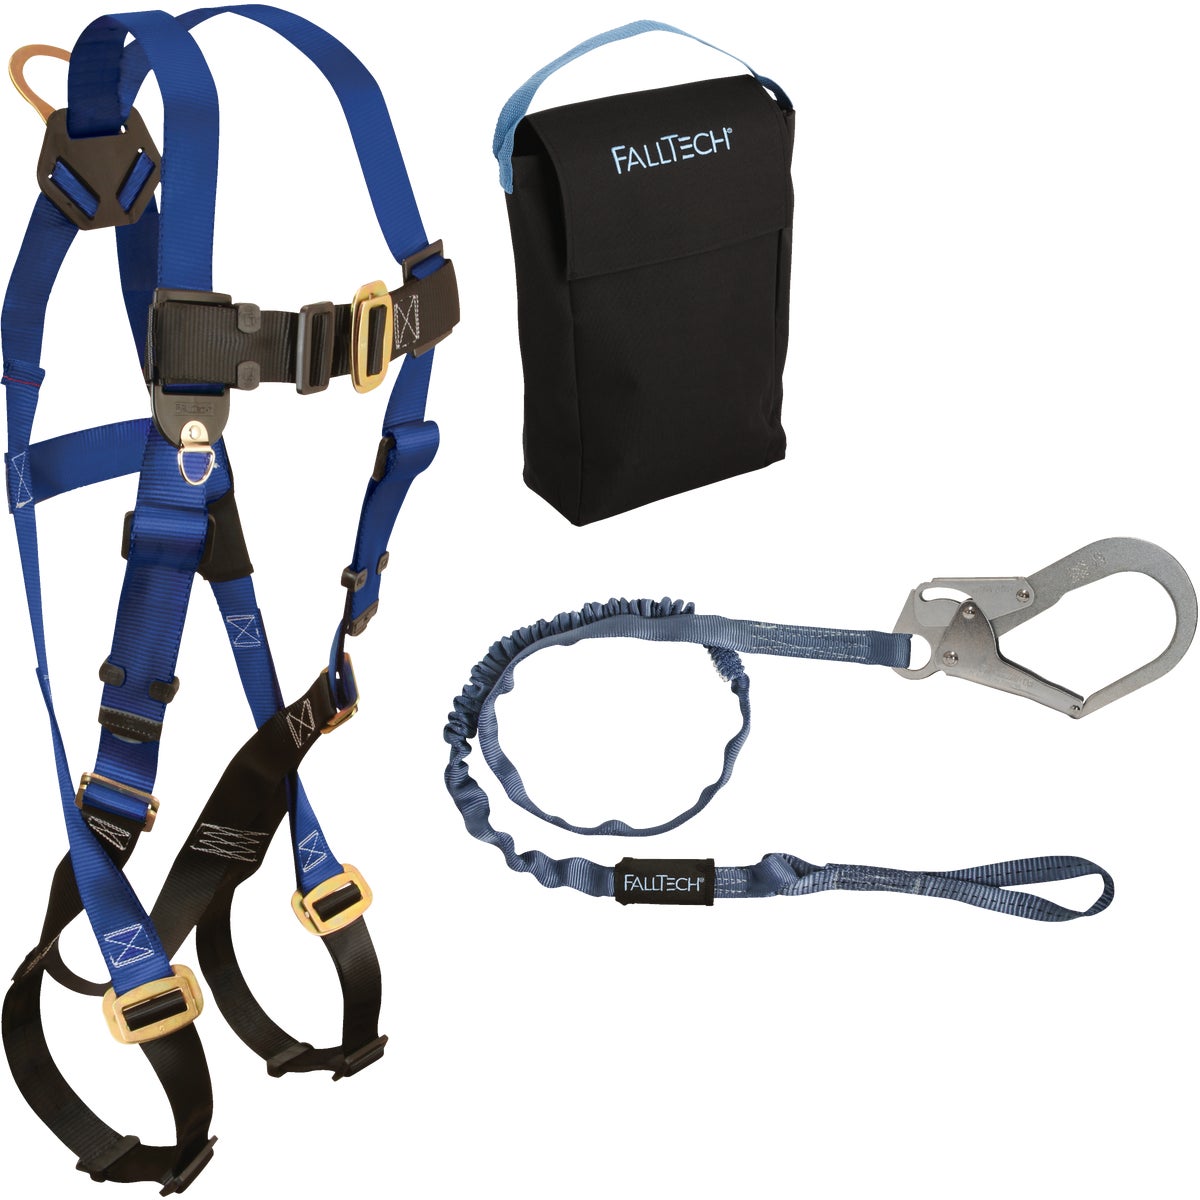 Item 347582, Vest-style harness with integral shock-absorbing lanyard.